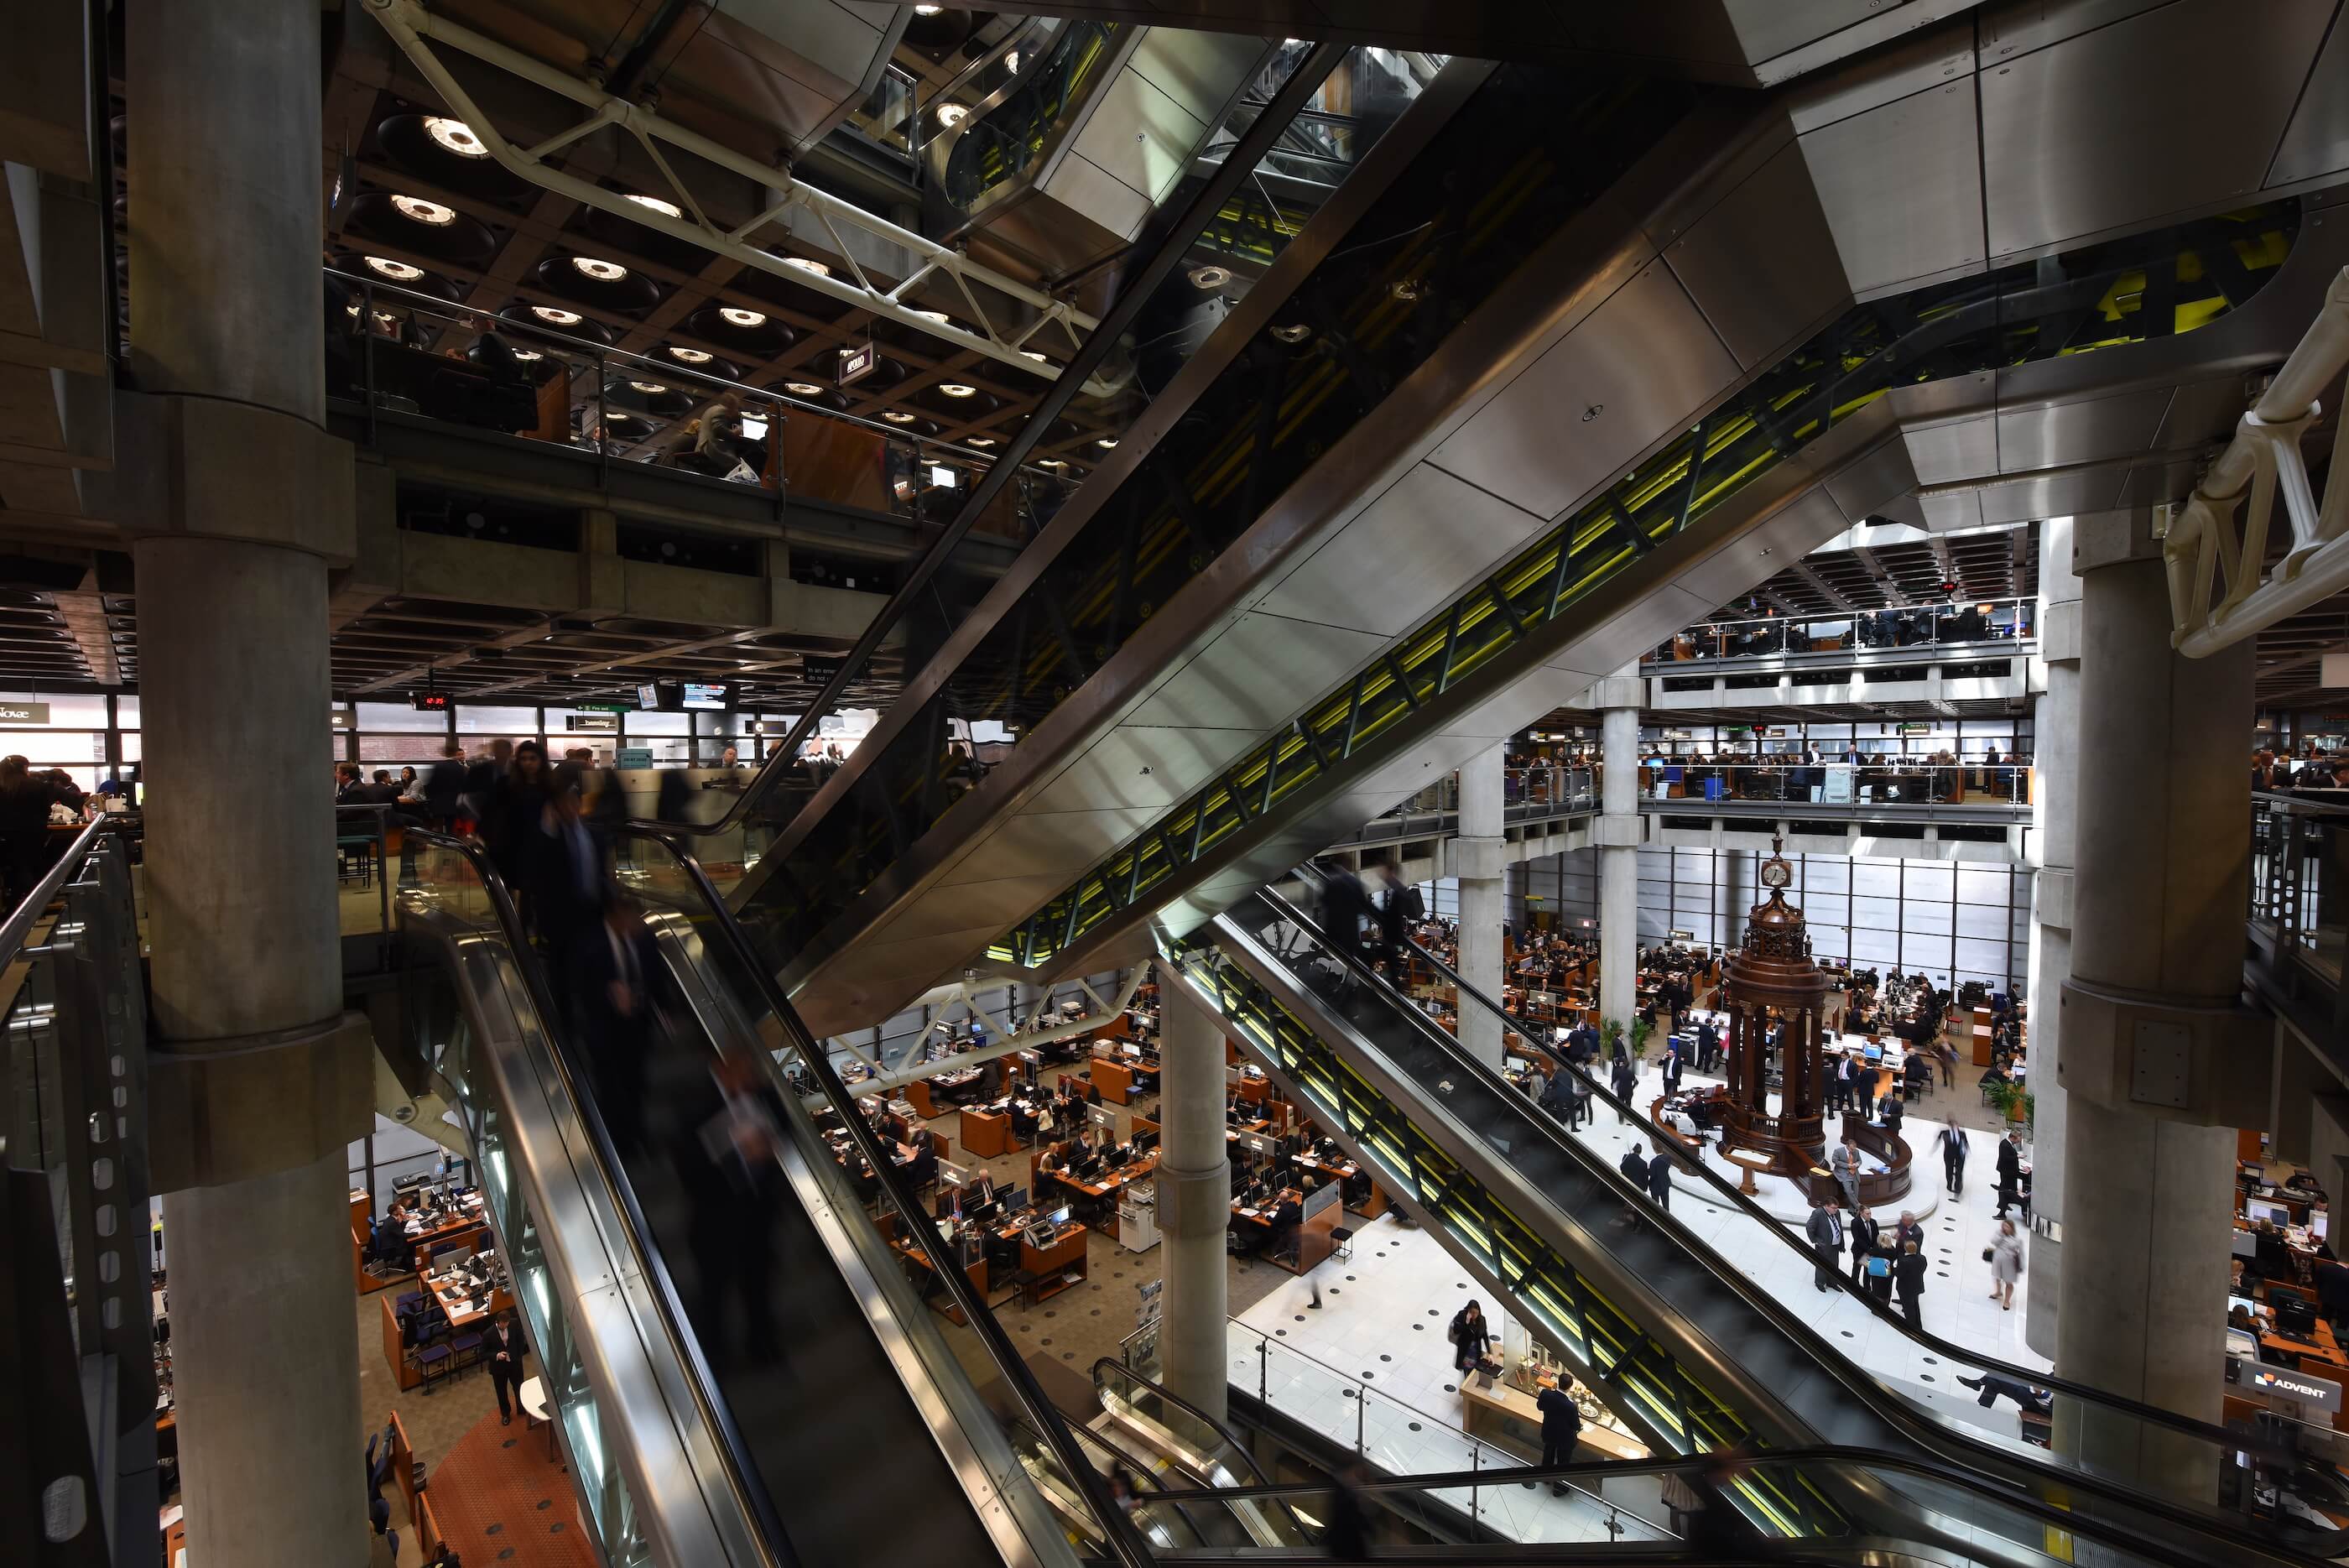 Interior of a massive atrium space with sprawling escalators in every direction